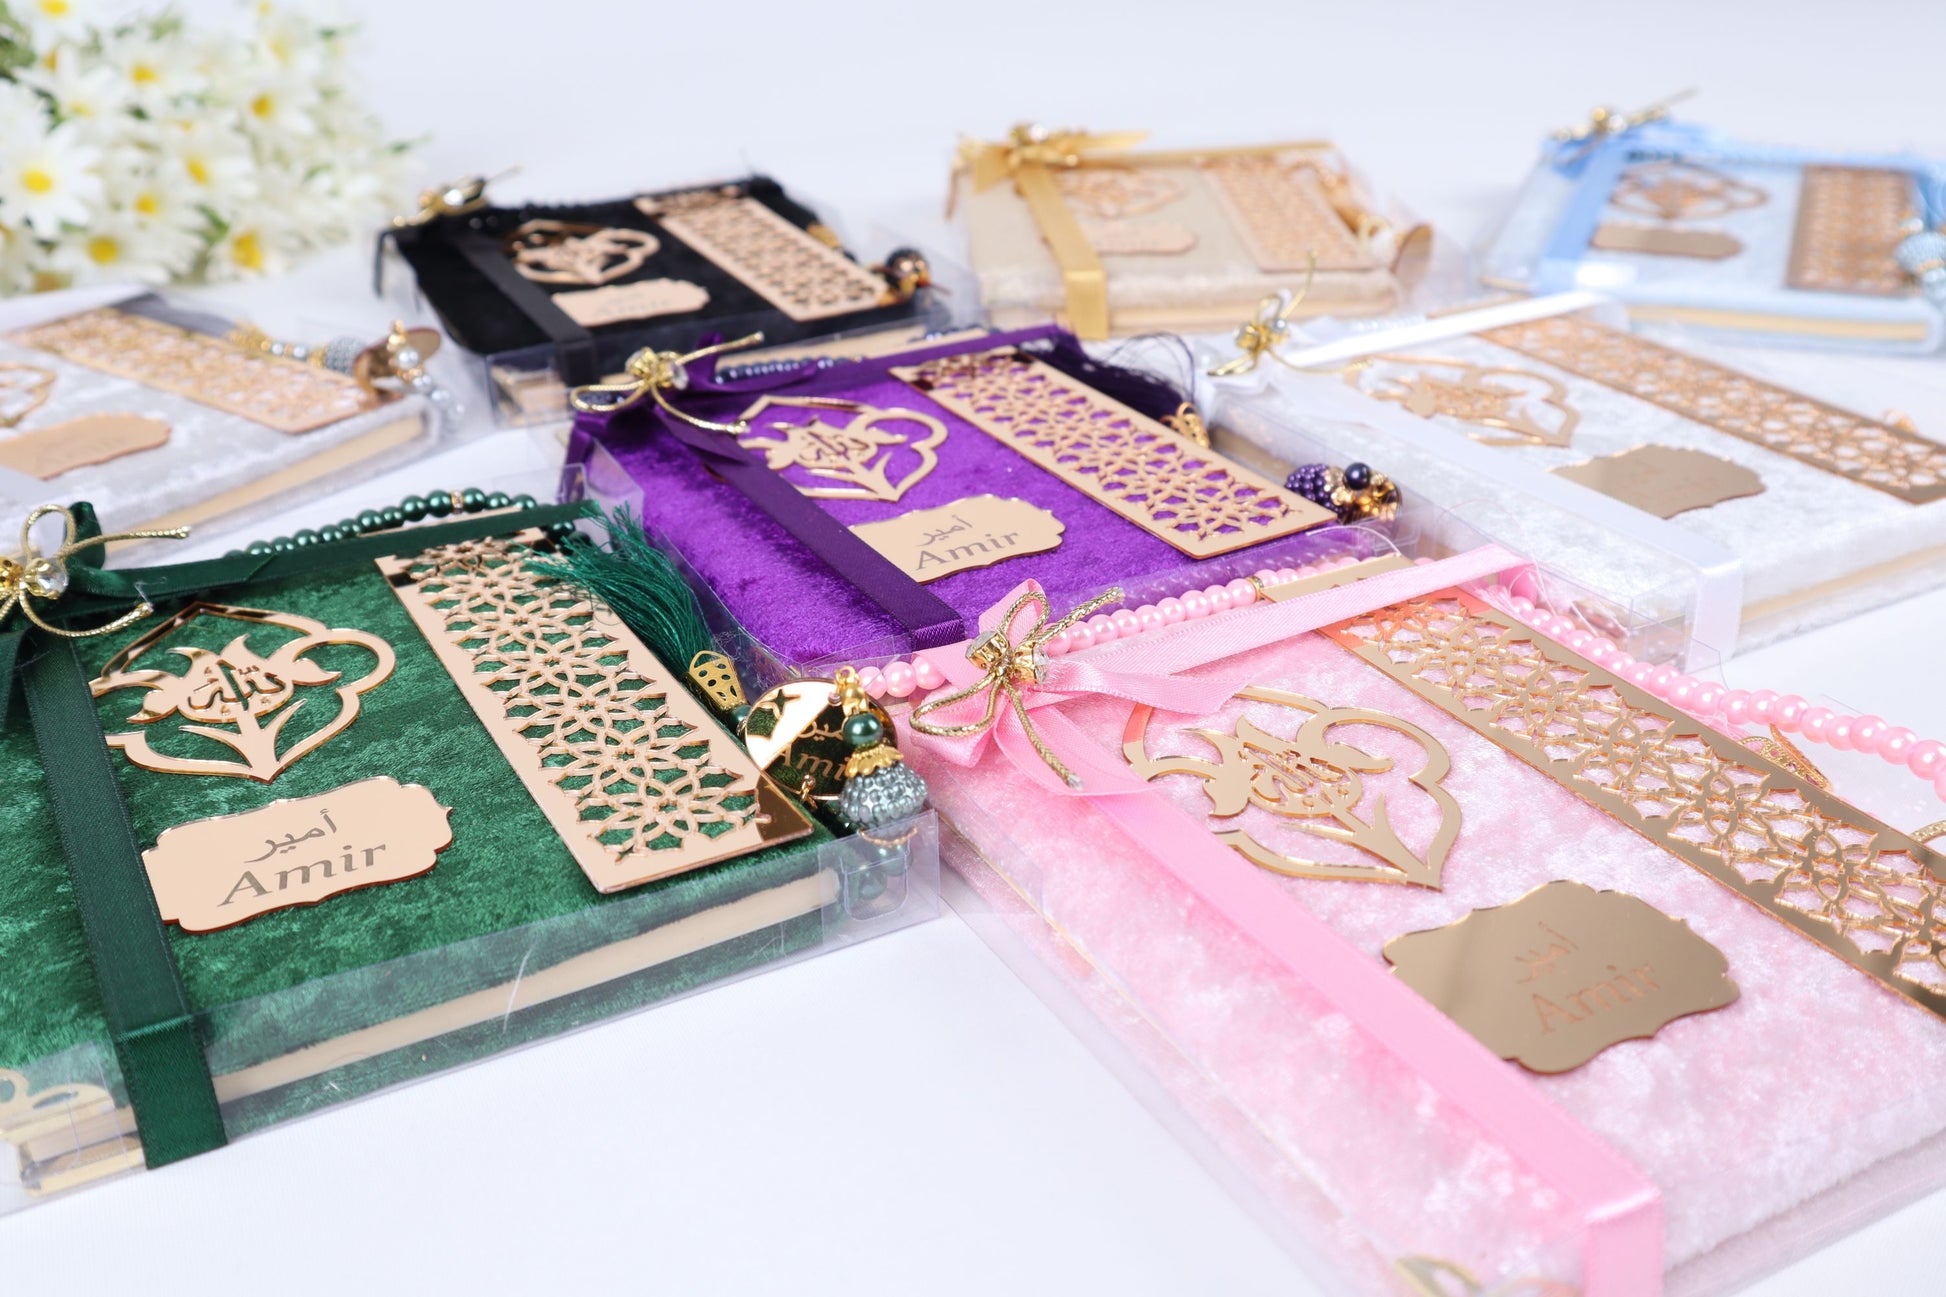 Personalized Islam Muslim Gift Set Velvet Dua Book Pearl Tasbeeh - Islamic Elite Favors is a handmade gift shop offering a wide variety of unique and personalized gifts for all occasions. Whether you're looking for the perfect Ramadan, Eid, Hajj, wedding gift or something special for a birthday, baby shower or anniversary, we have something for everyone. High quality, made with love.